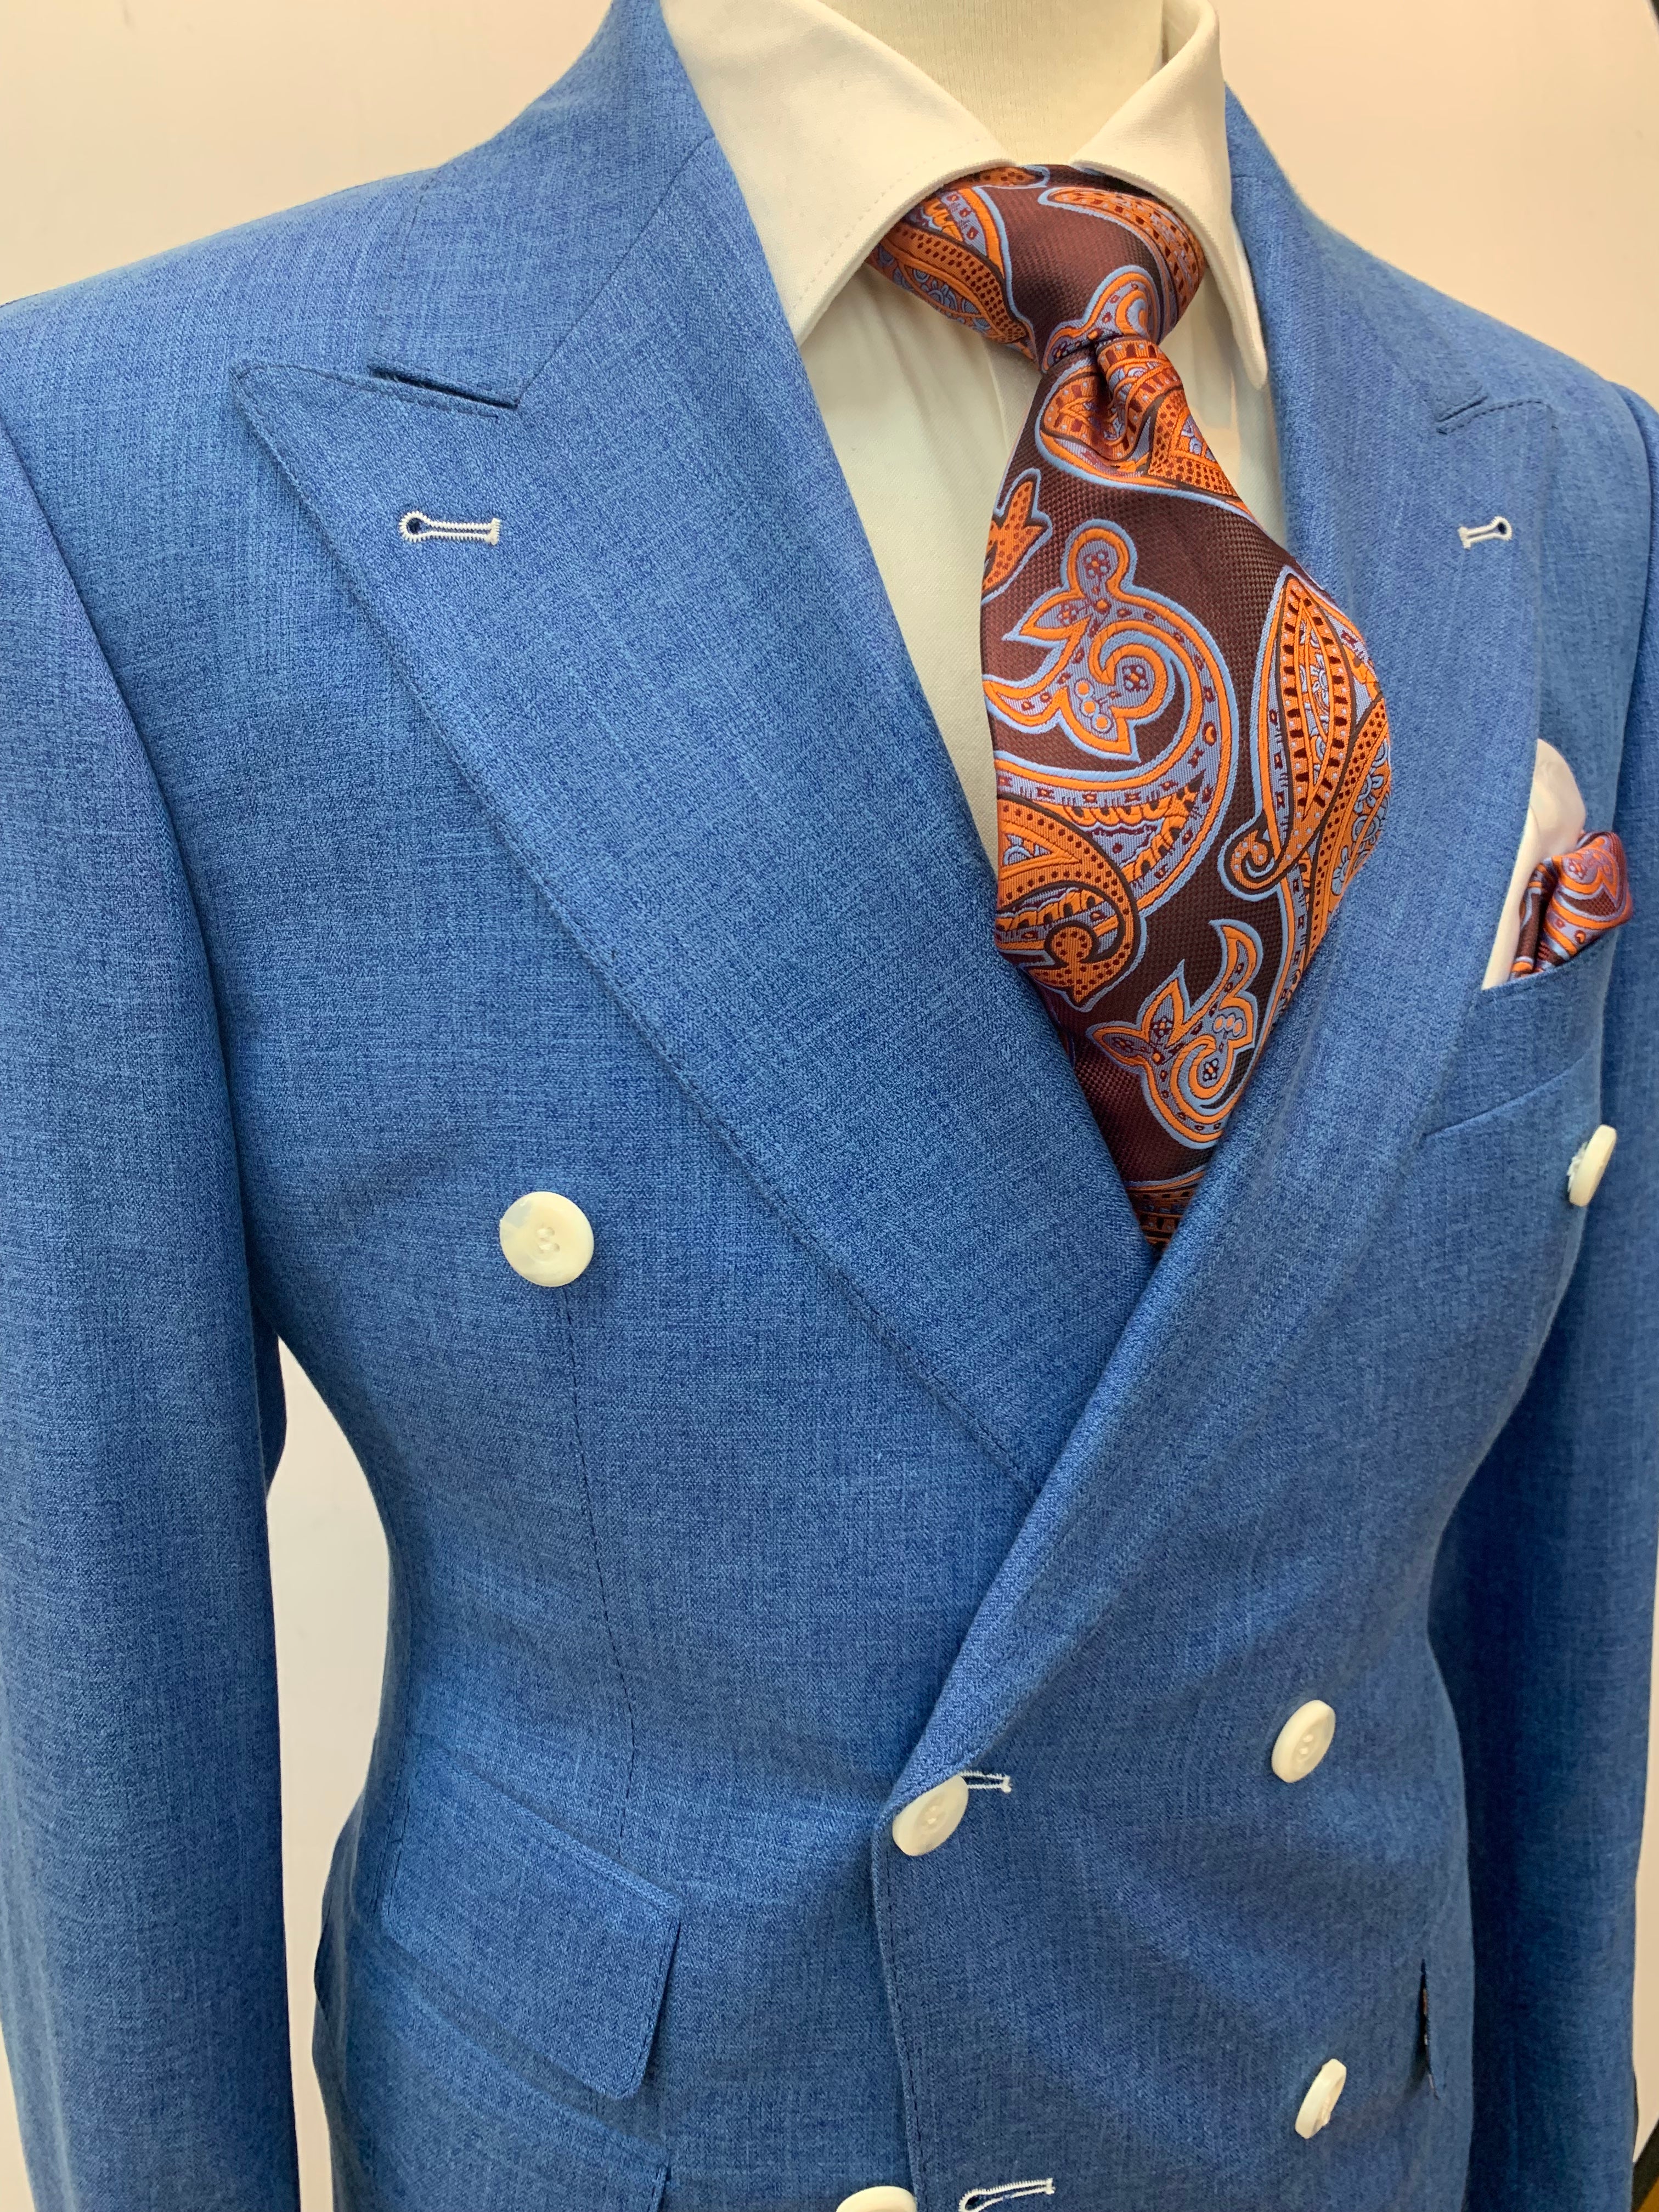 Stitch by Stitch Light Blue Double Breasted Suit